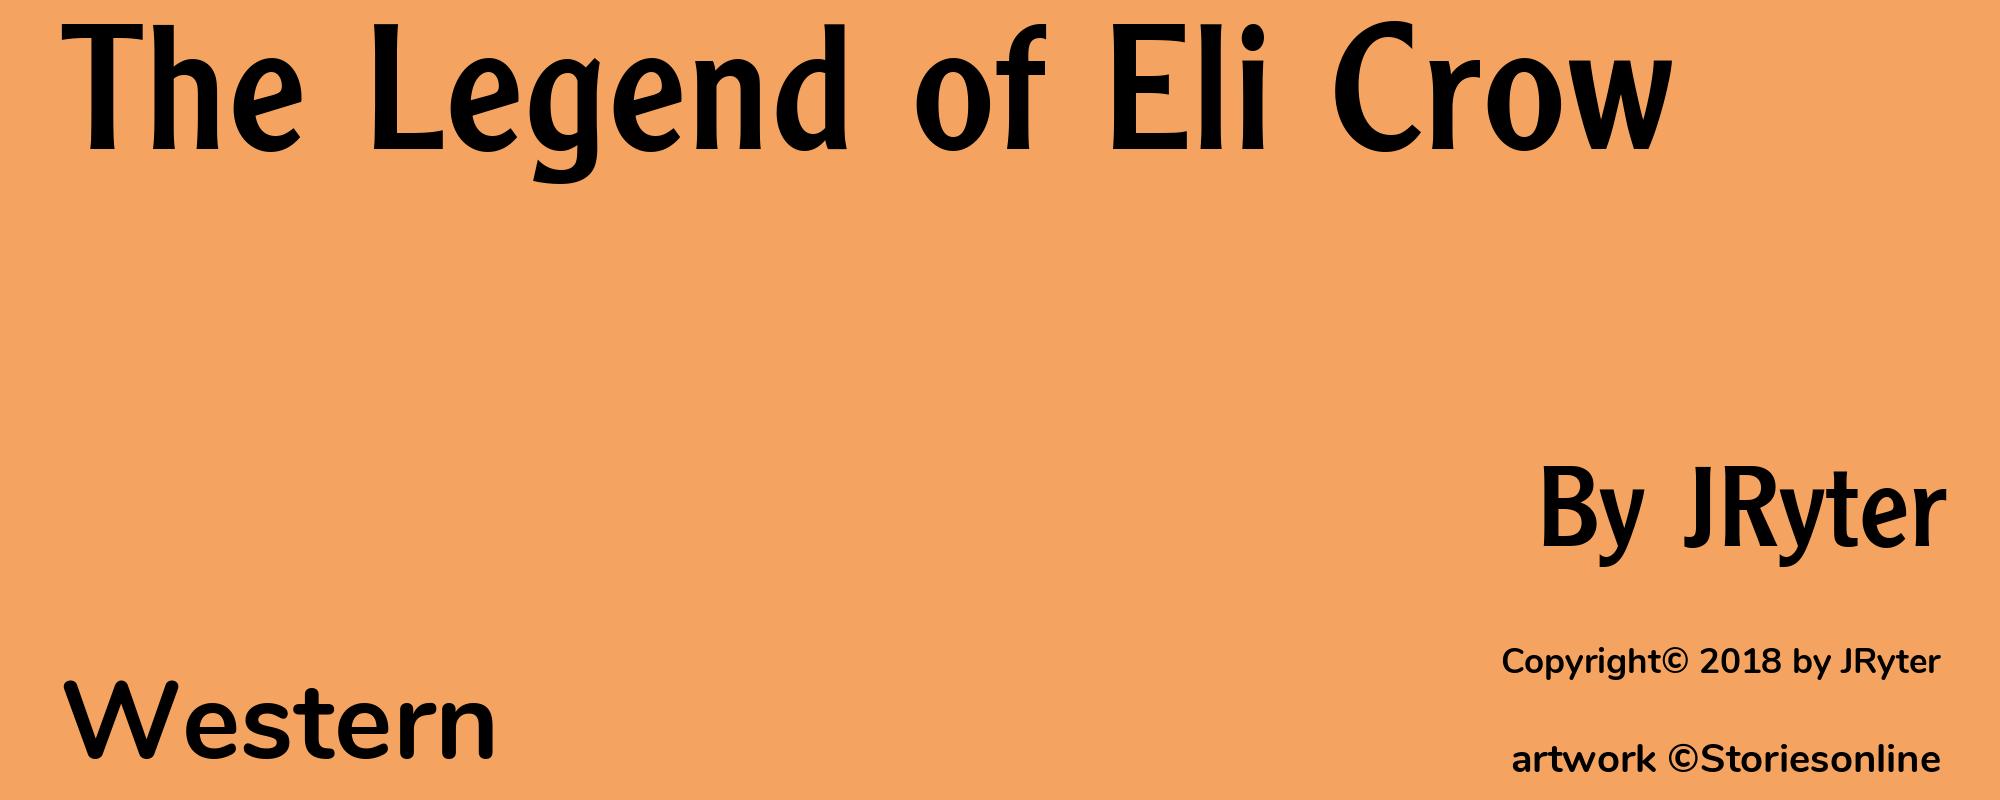 The Legend of Eli Crow - Cover